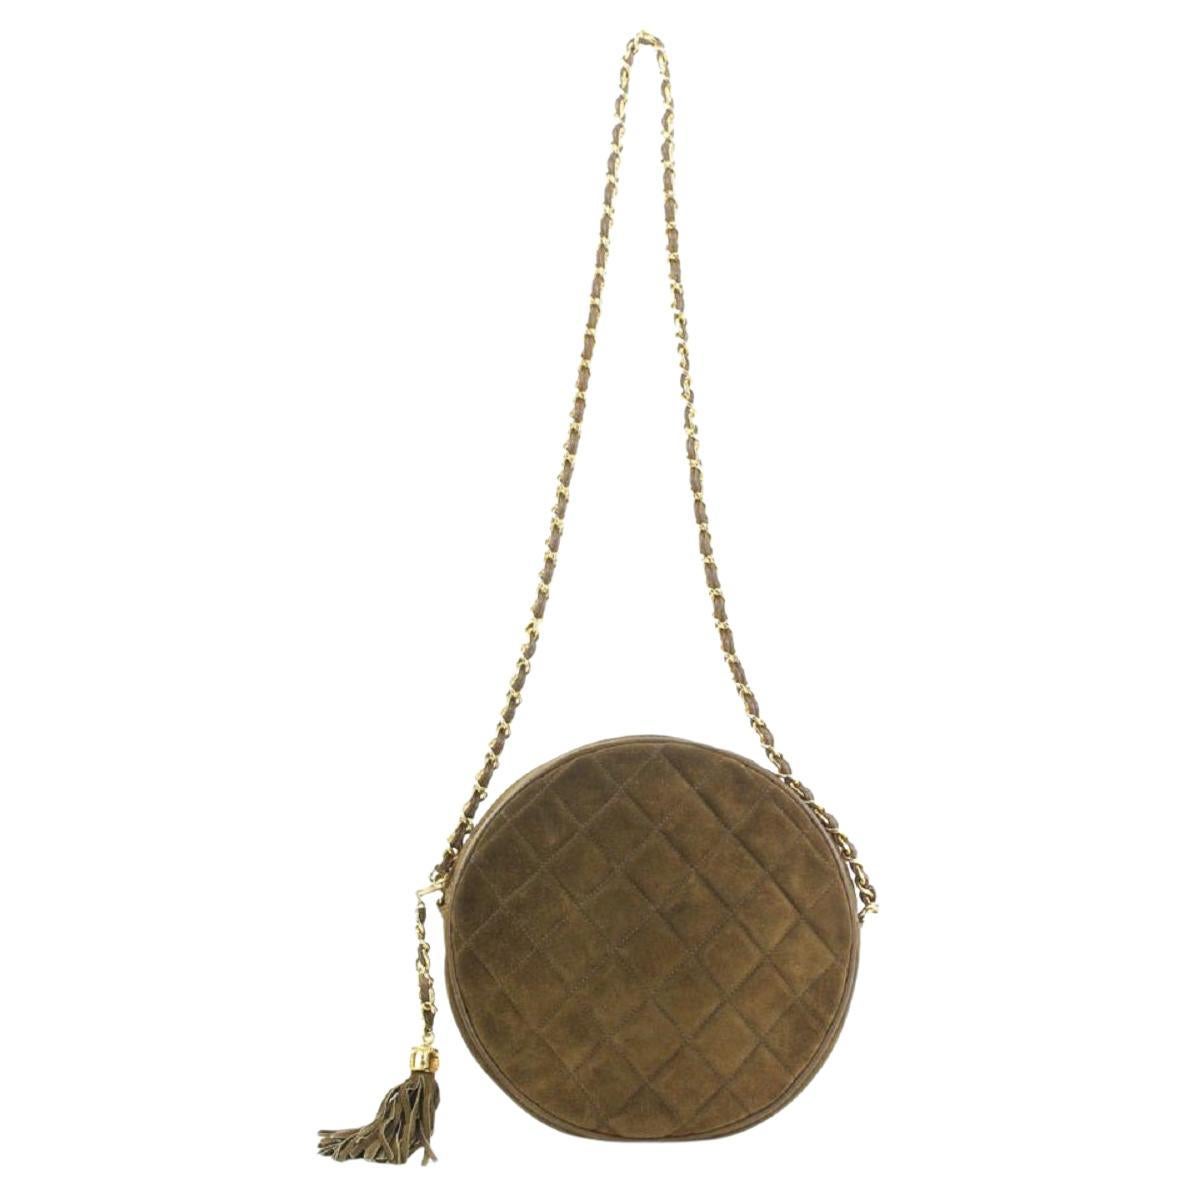 Chanel Brown Quilted Suede Fringe Tassle Round Clutch with Chain Bag